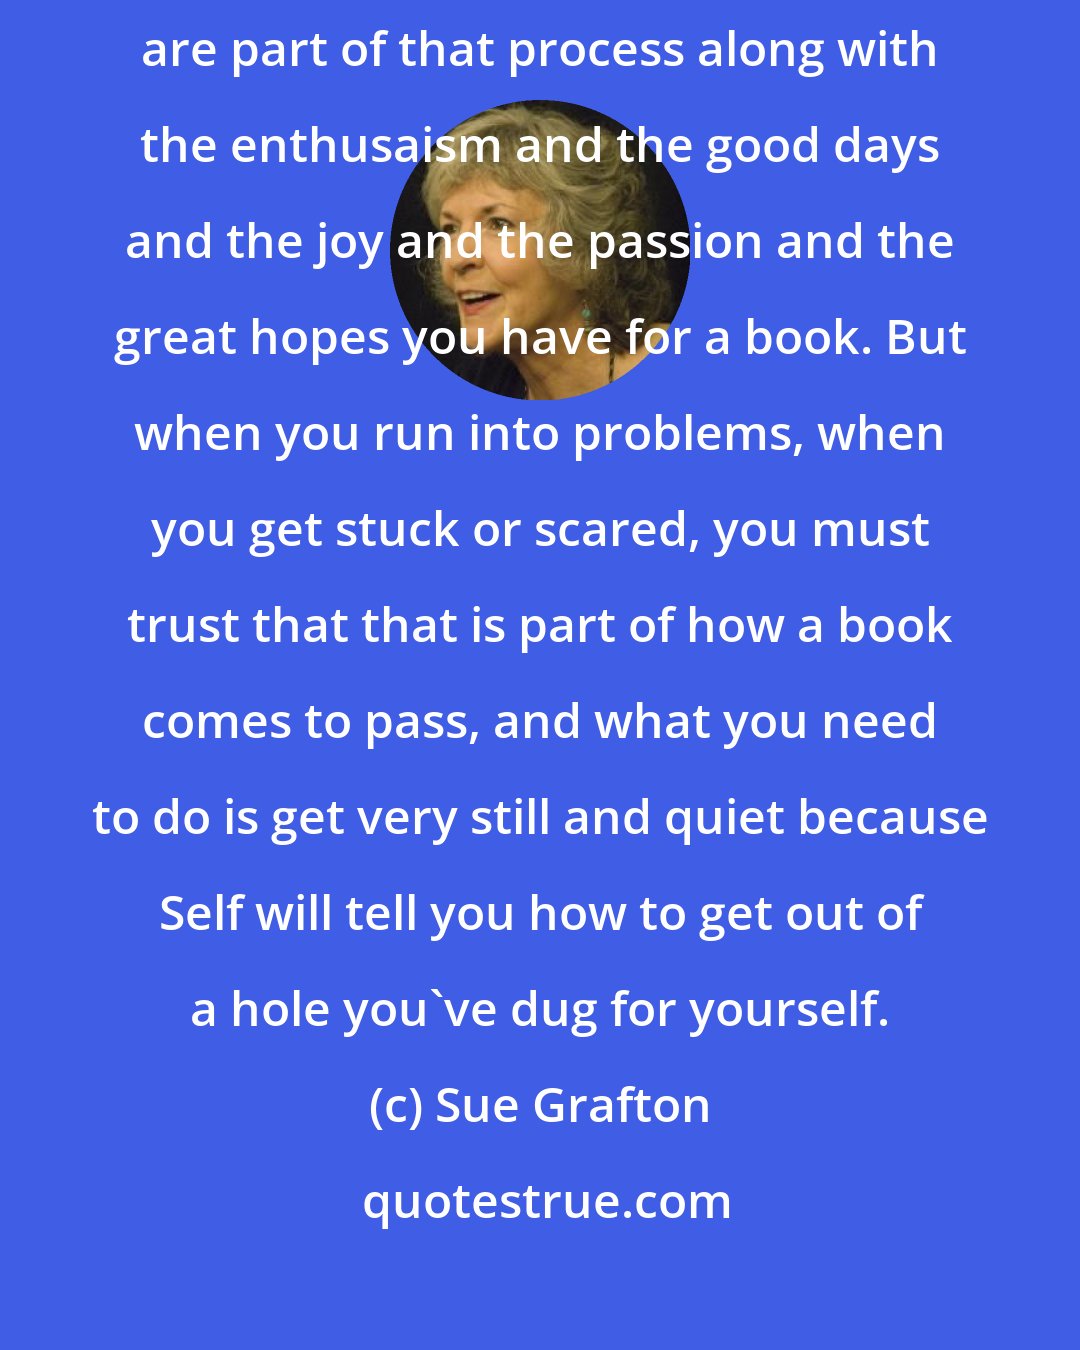 Sue Grafton: Writing is a process and you must trust the process! Fear and anxiety are part of that process along with the enthusaism and the good days and the joy and the passion and the great hopes you have for a book. But when you run into problems, when you get stuck or scared, you must trust that that is part of how a book comes to pass, and what you need to do is get very still and quiet because Self will tell you how to get out of a hole you've dug for yourself.